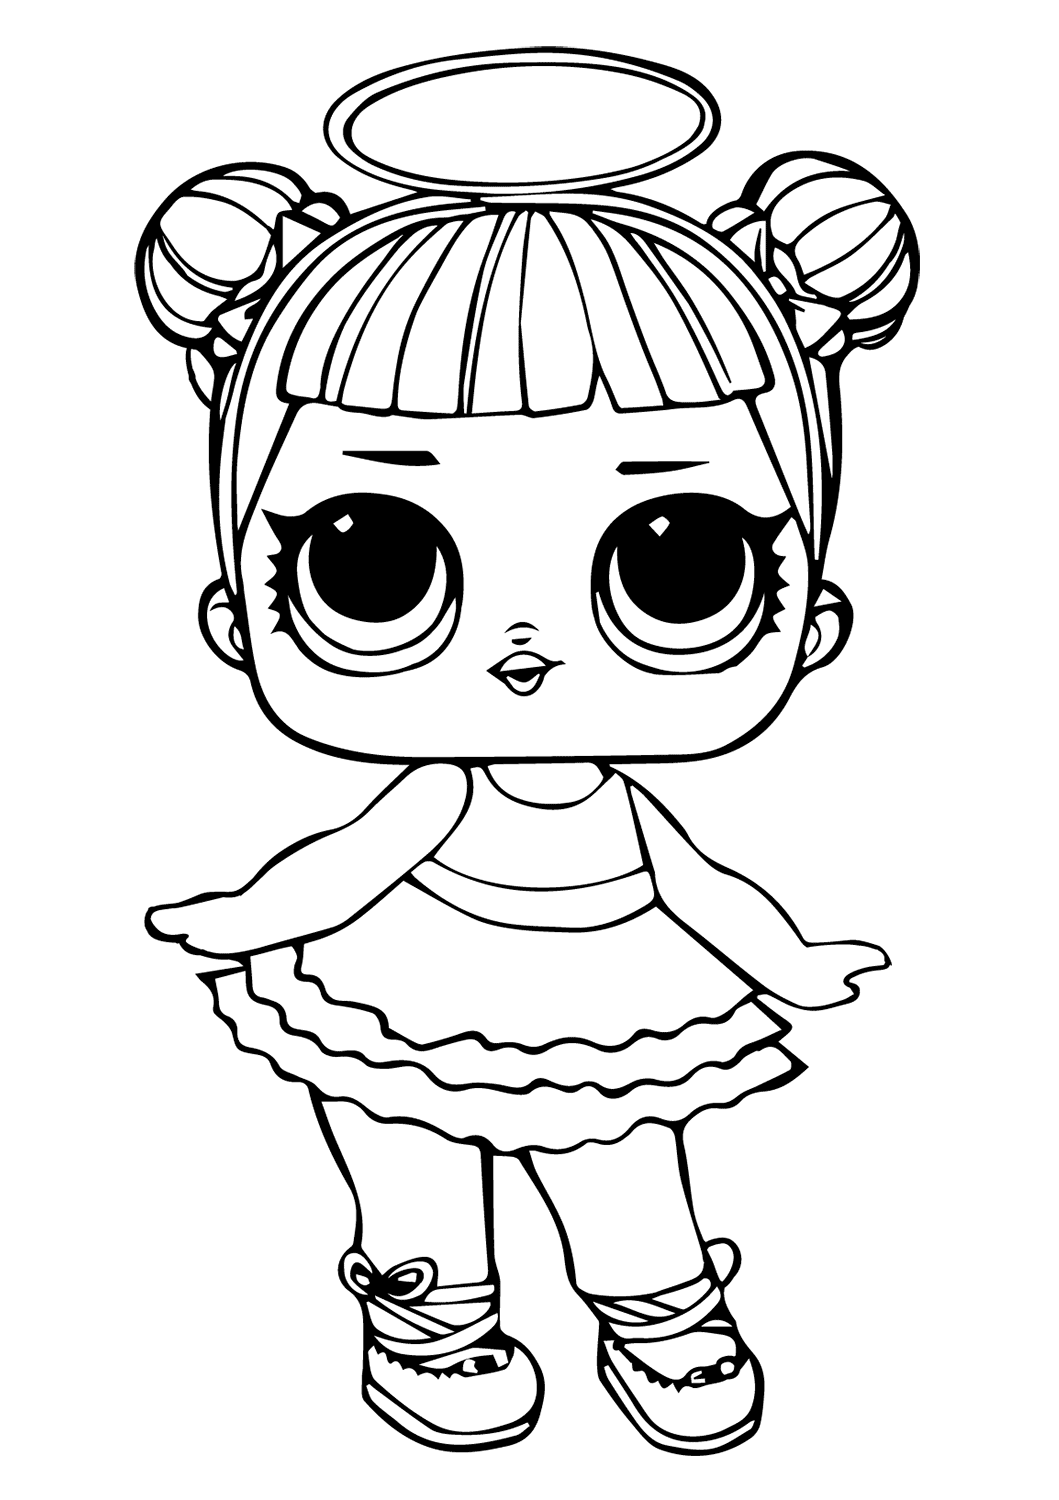 Sugar Lol Doll Coloring Page - Free Printable Coloring Pages for Kids